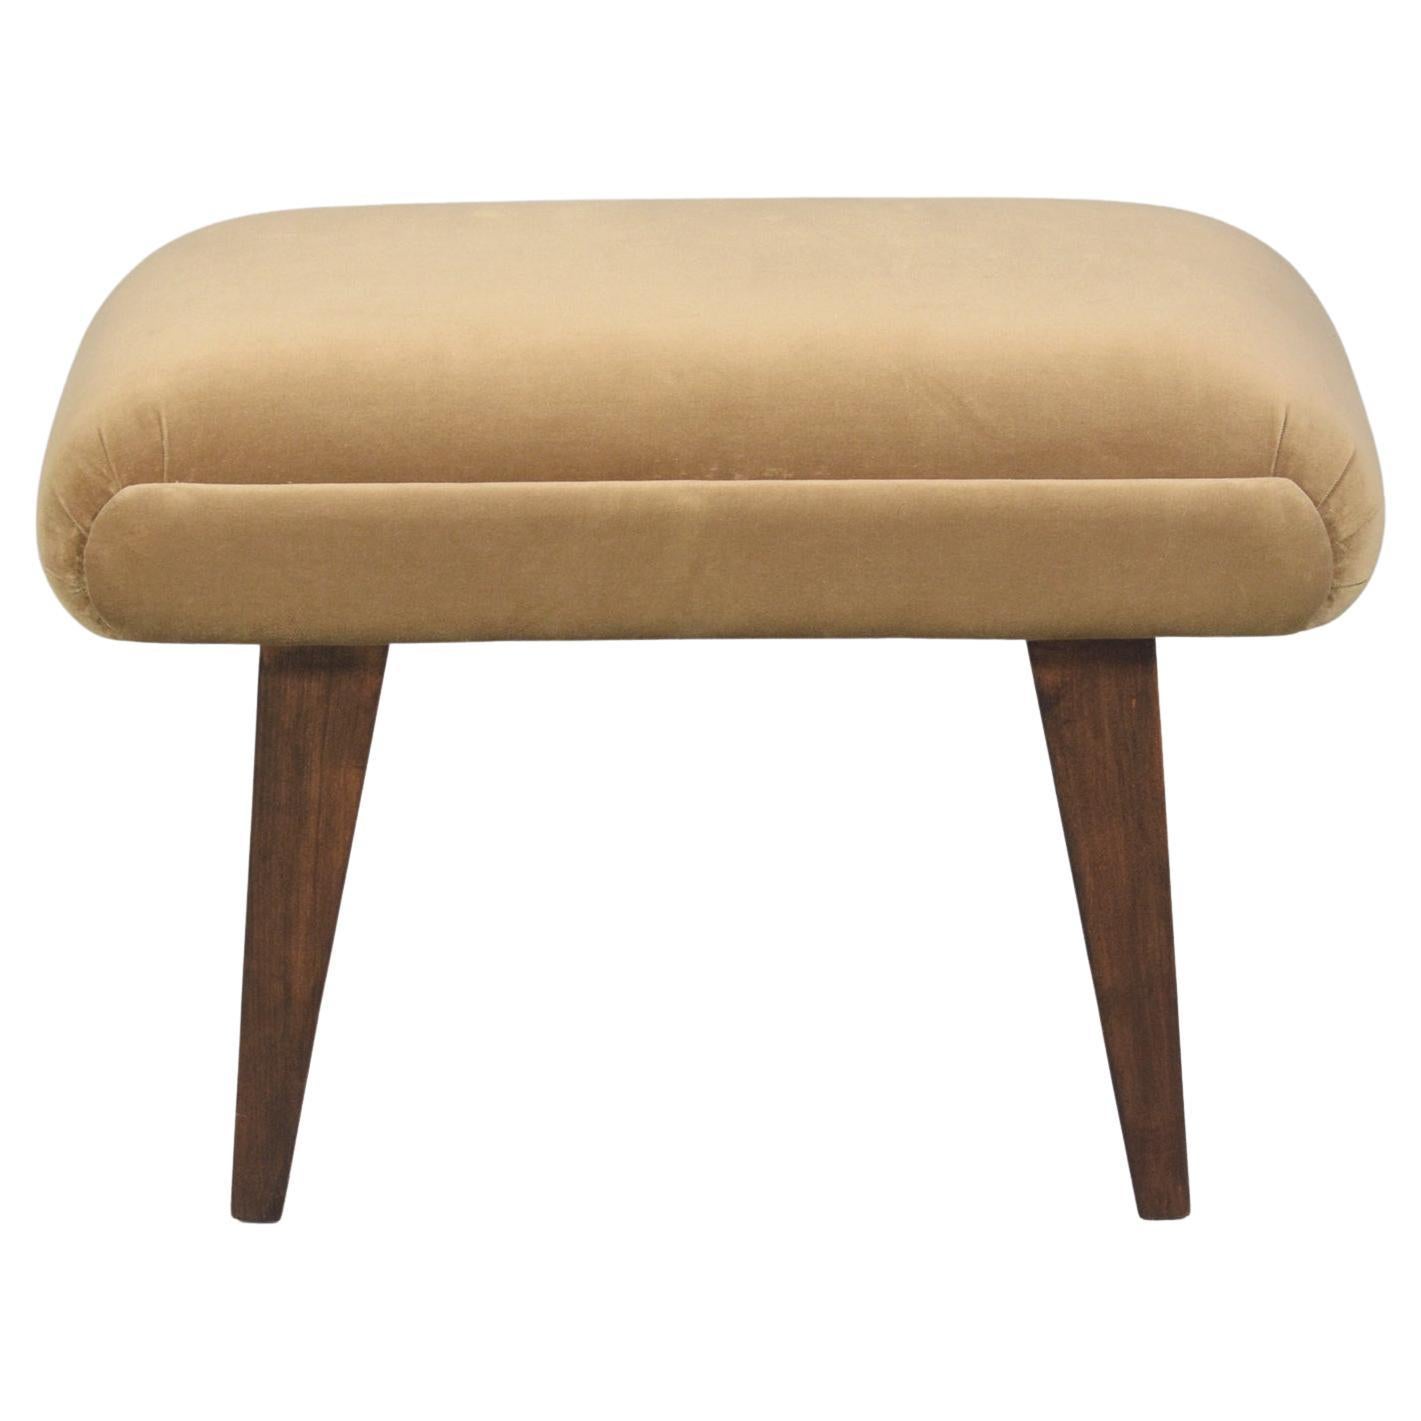 Rediscover the 1960s charm with our Mid-Century Modern Stool, a piece that beautifully encapsulates vintage elegance and exceptional craftsmanship. Handcrafted from durable wood, this stool has been lovingly restored by our expert in-house team,